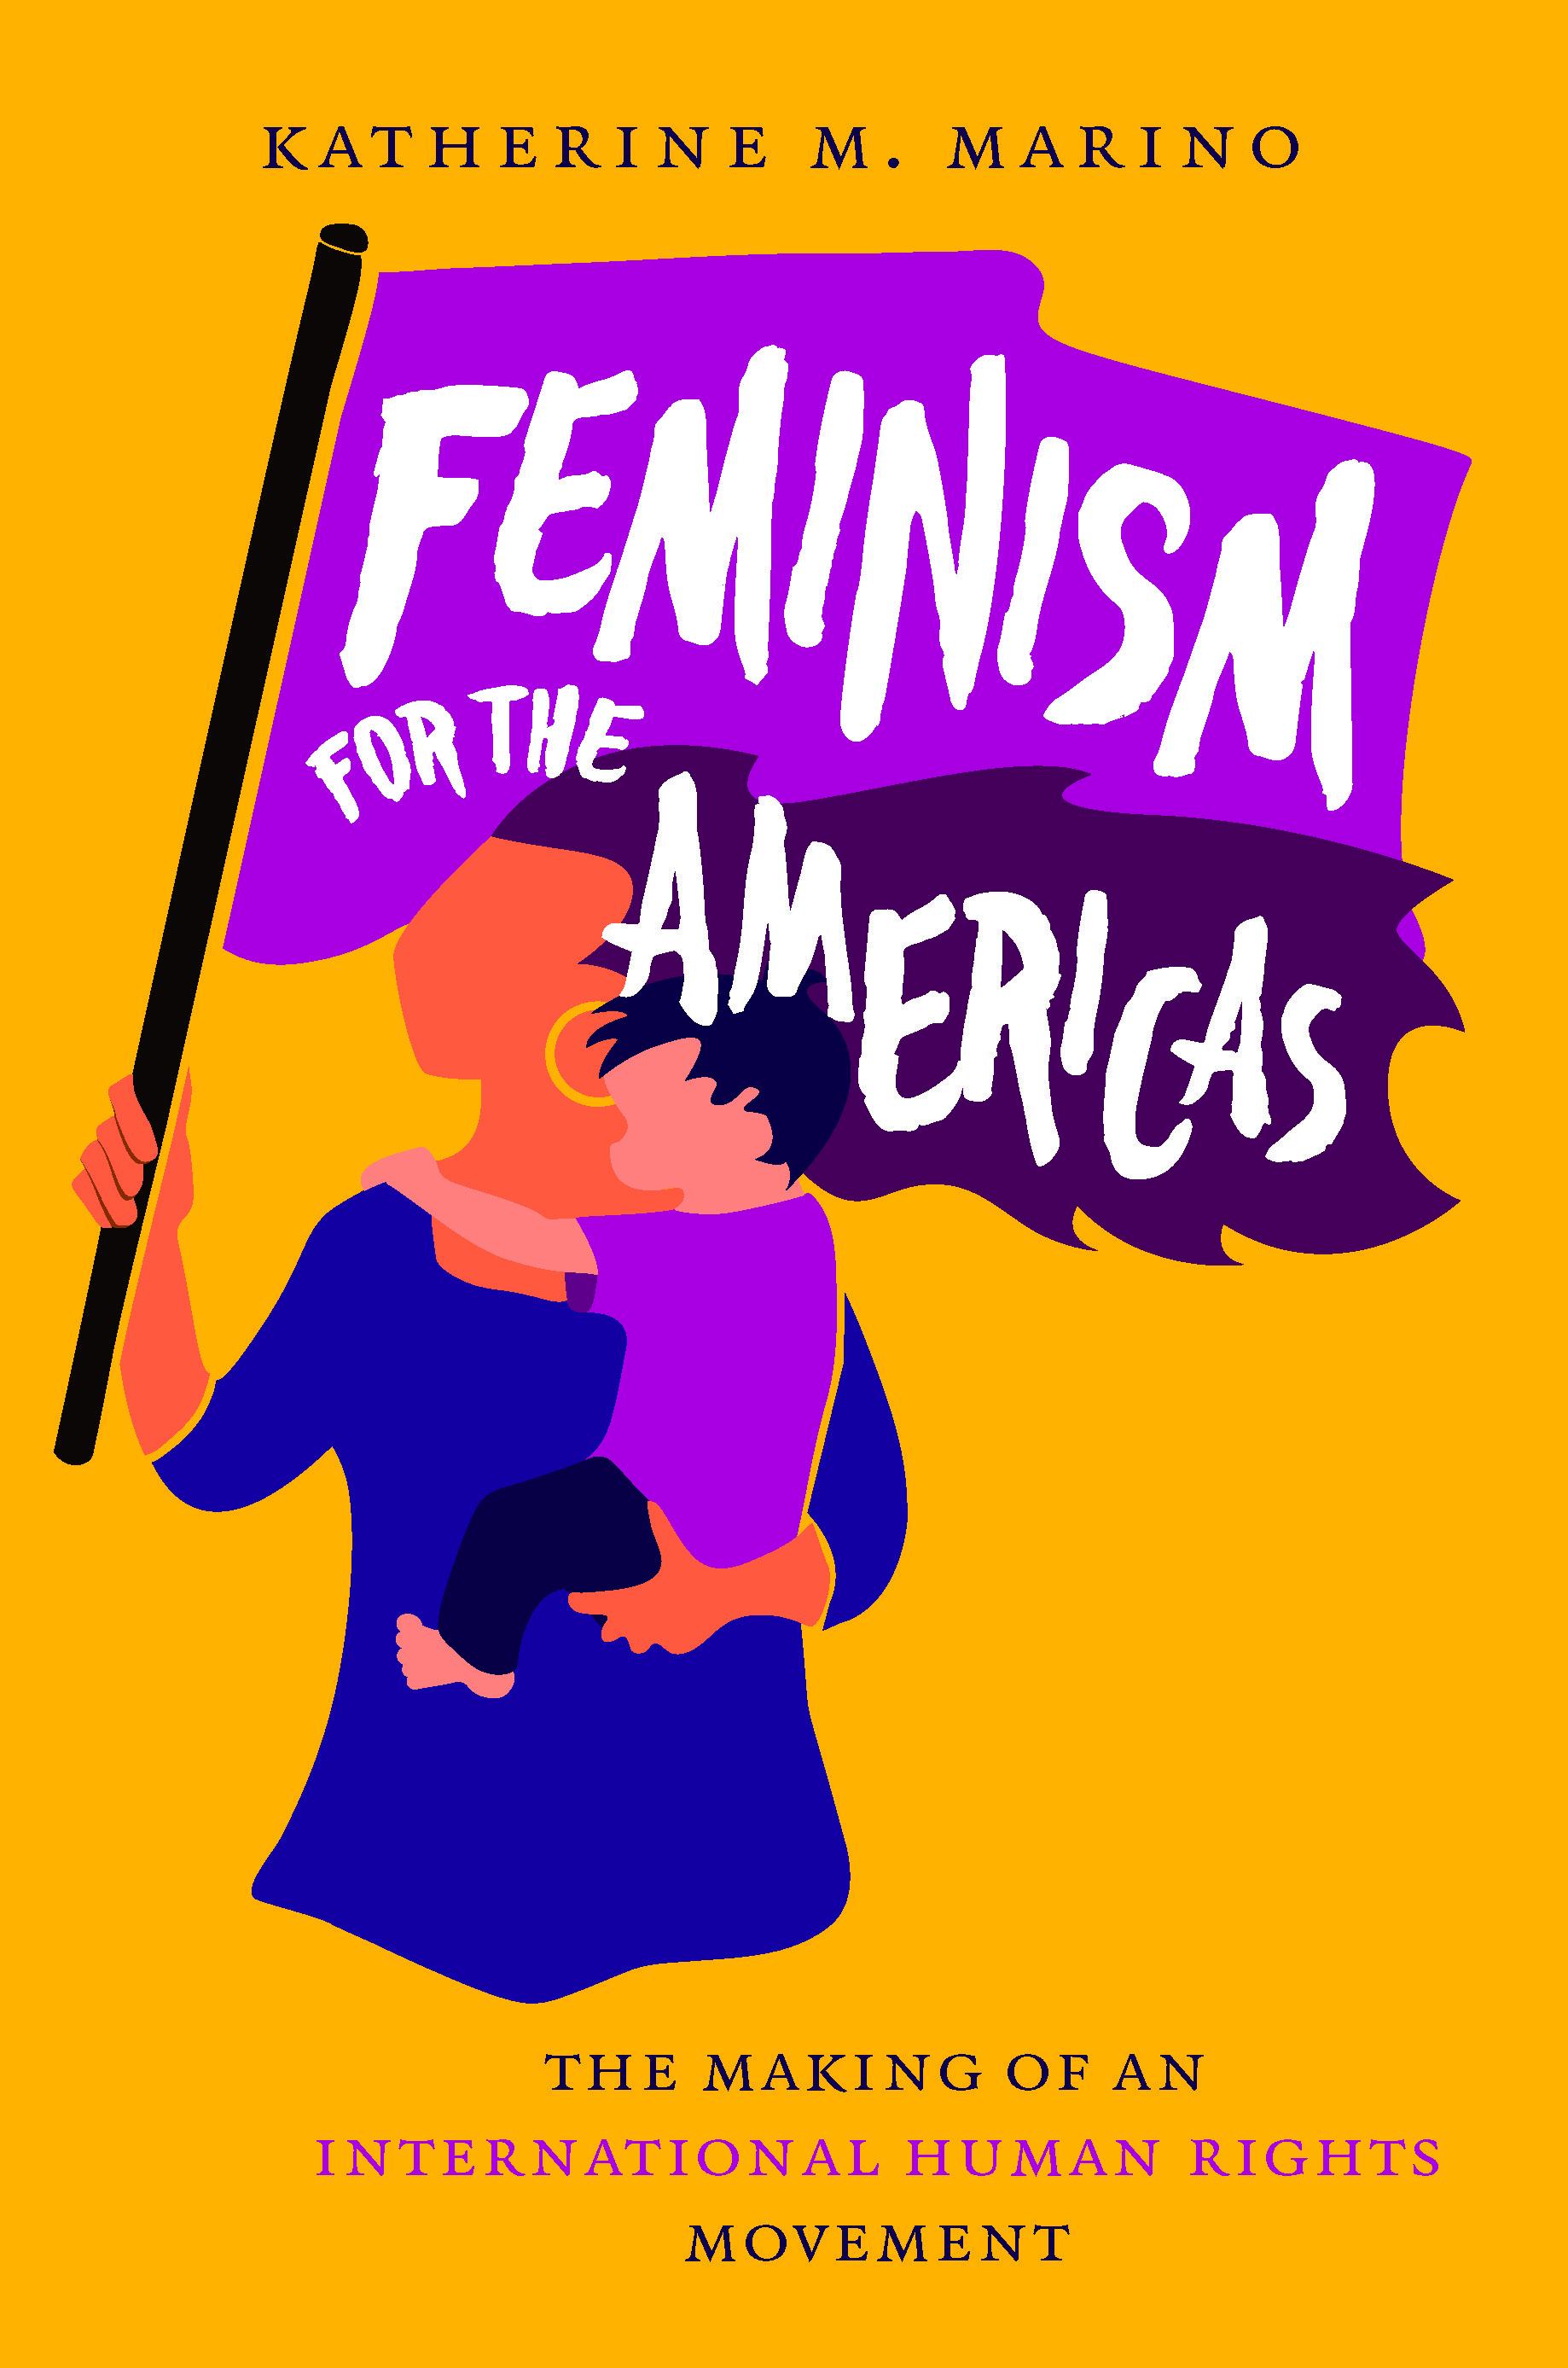 Book cover of Feminism for the Americas